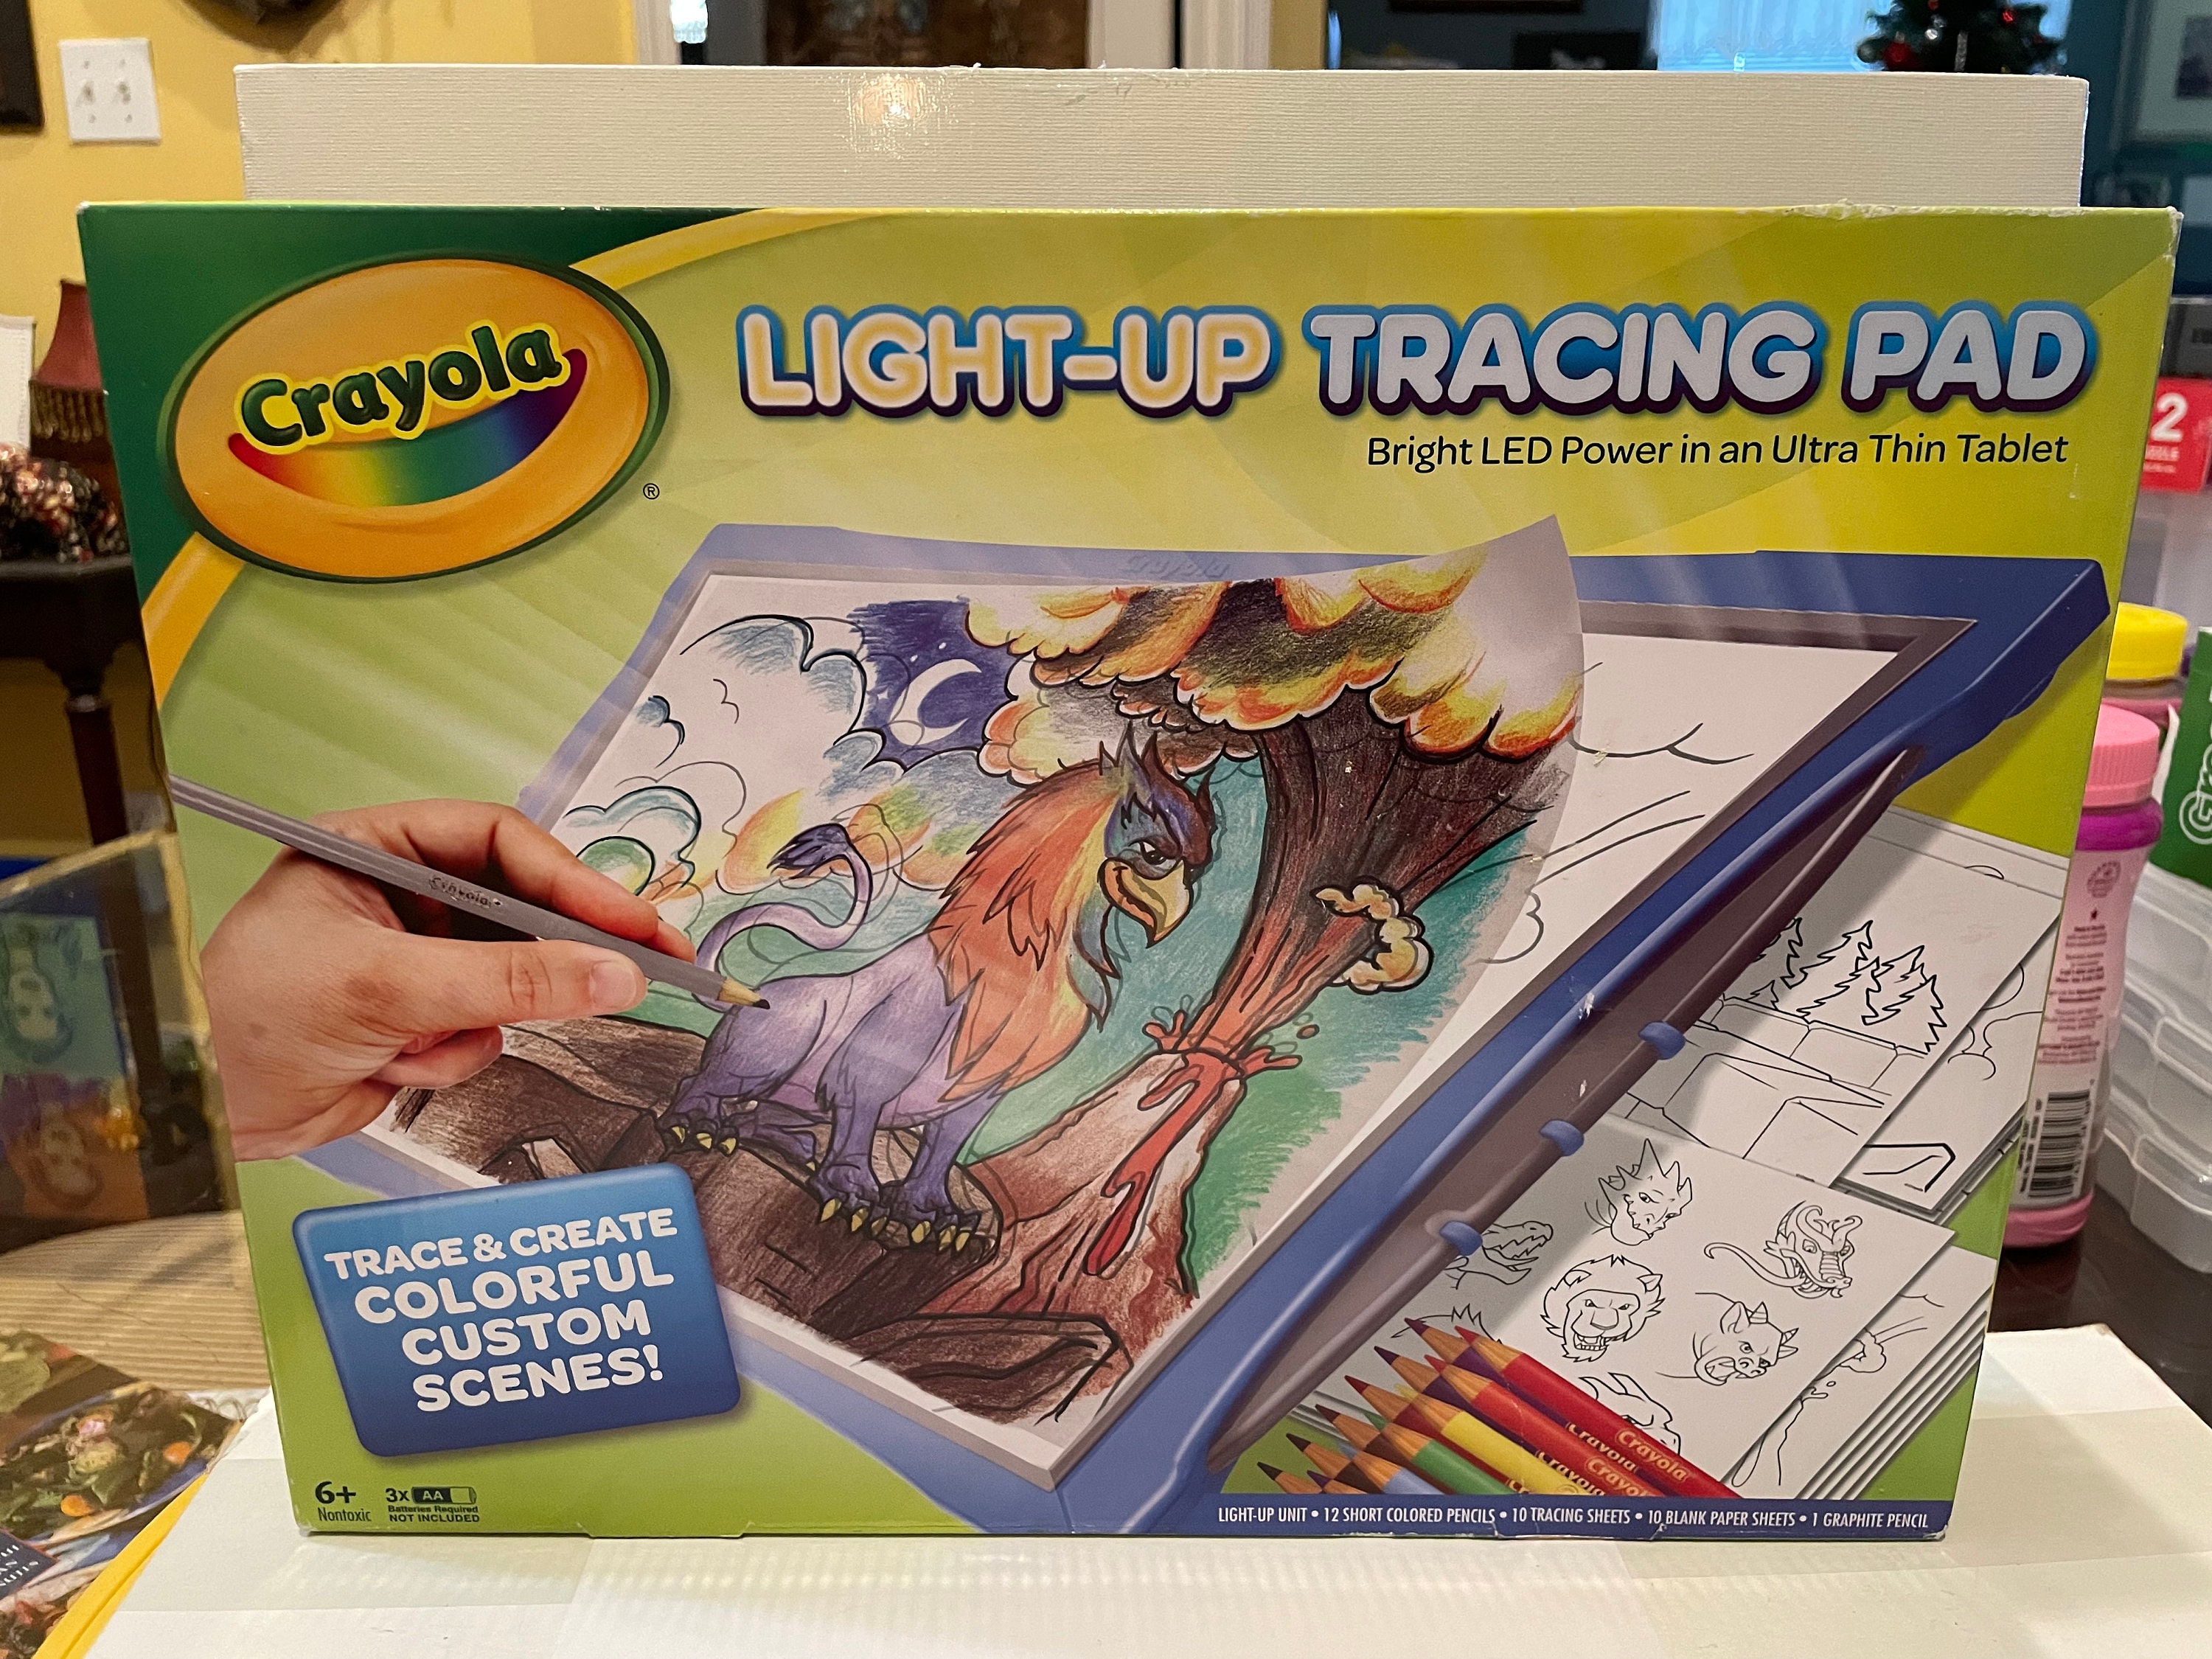 New Crayola Light-Up Tracing Pad Bright LED Power Trace and Create